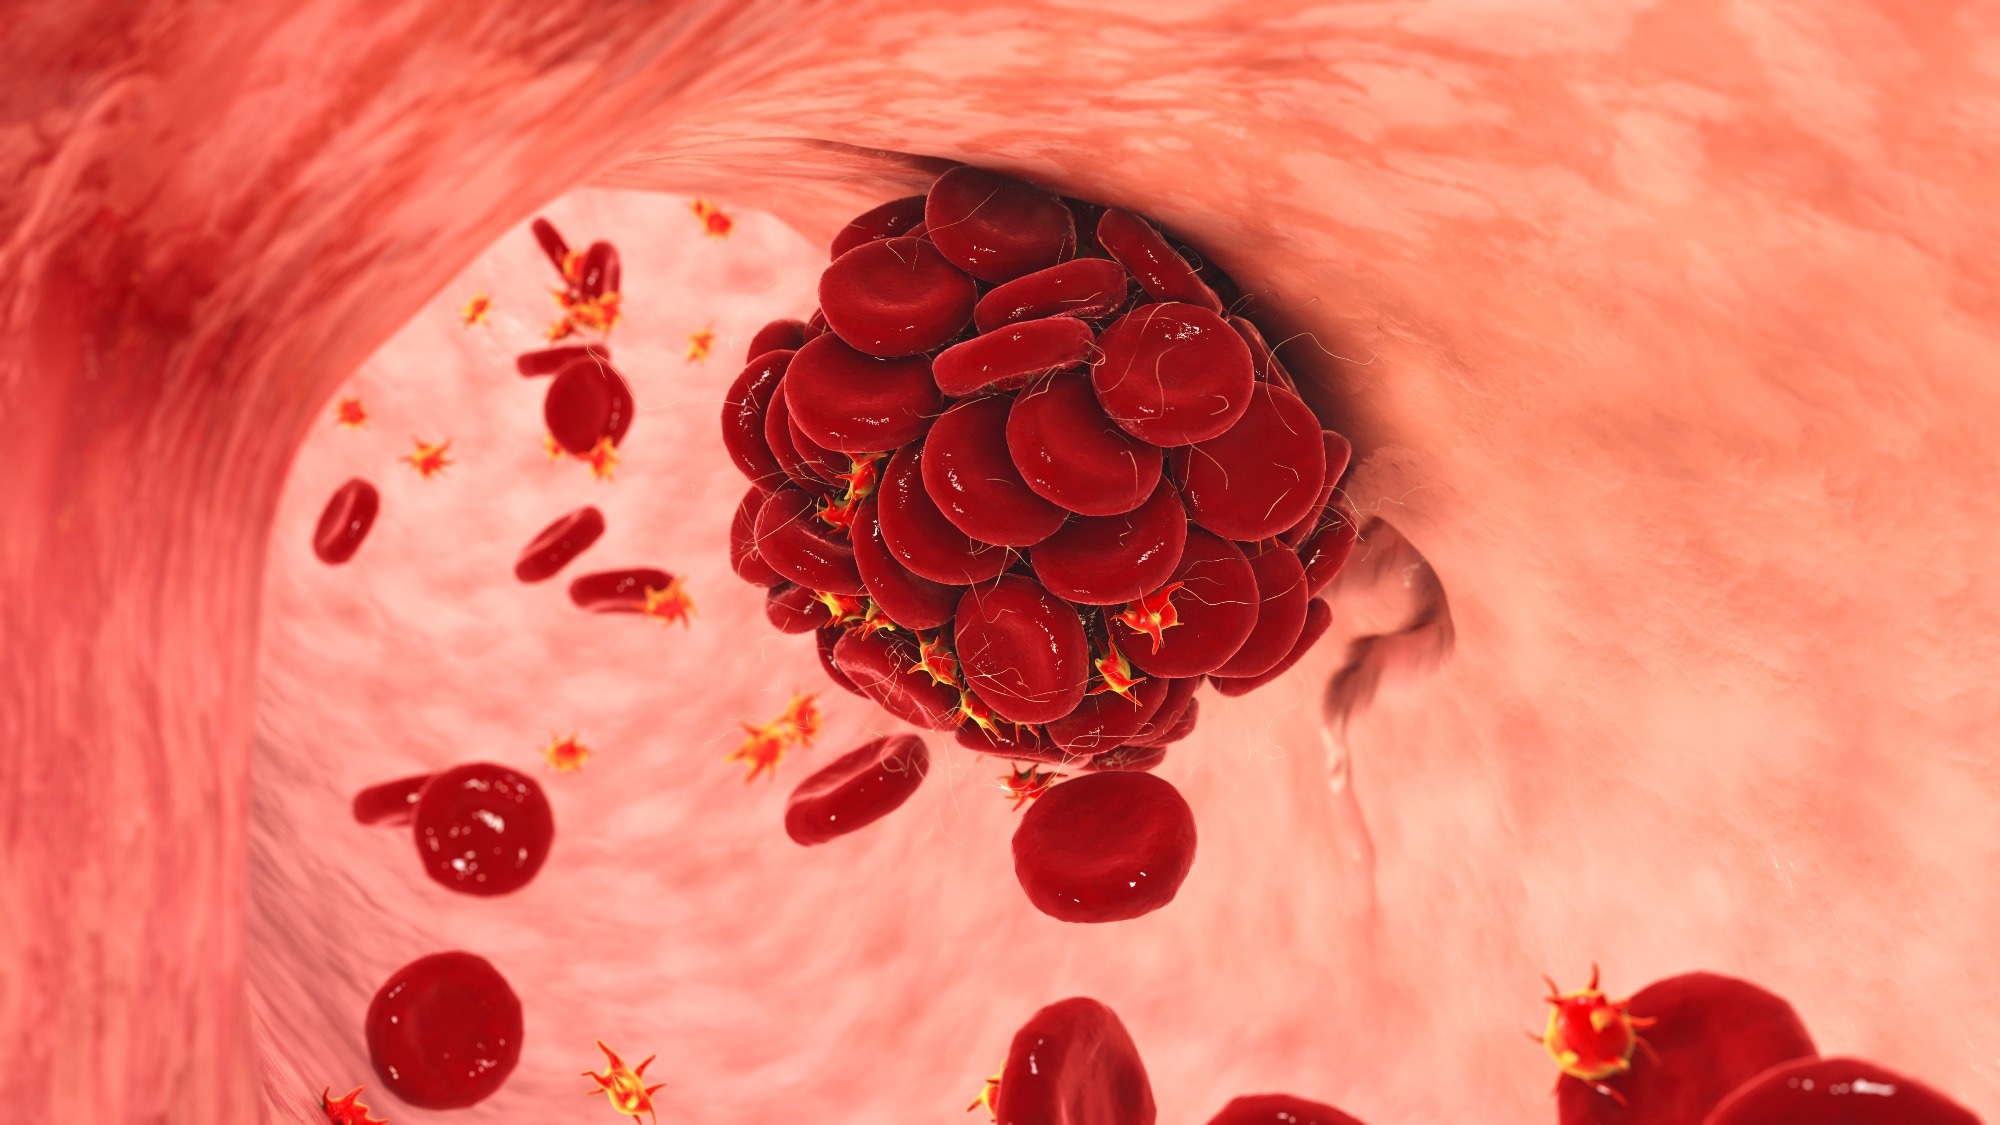 Study: Venous Thromboembolism After COVID-19 Infection Among People With and Without Immune-Mediated Inflammatory Diseases. Image Credit: Kateryna Kon / Shutterstock